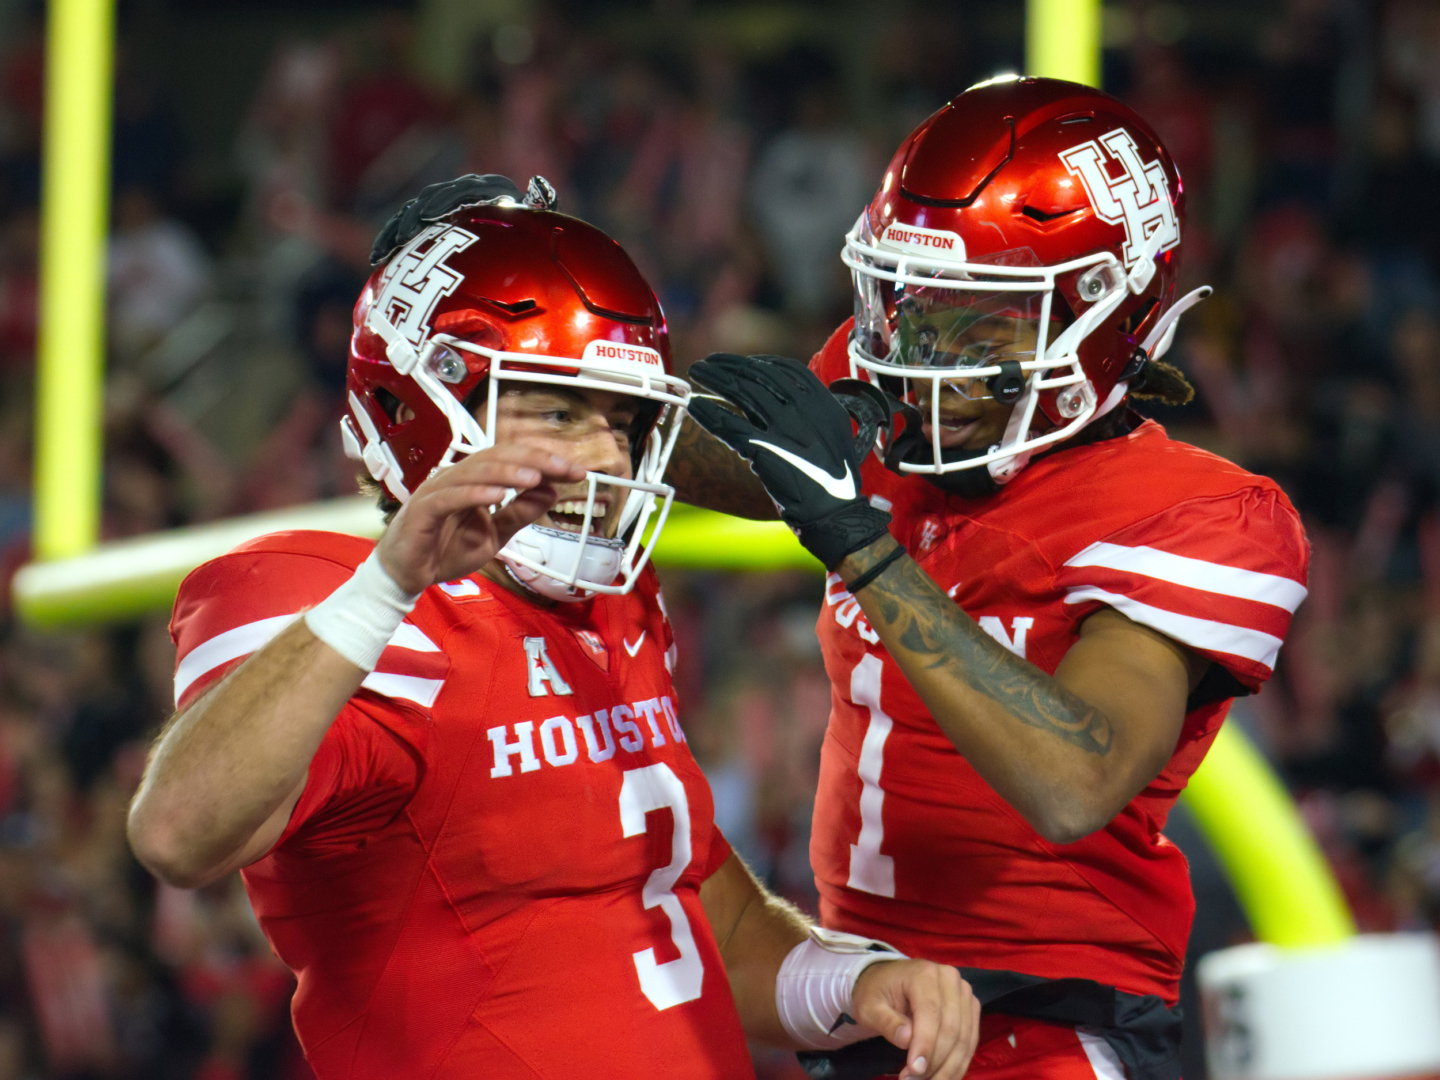 UH football quarterback Clayton Tune and wide receiver Tank Dell have appeared on multiple preseason watch lists as big things are expected from this Cougars' duo in 2022. | Steven Paultanis/The Cougar